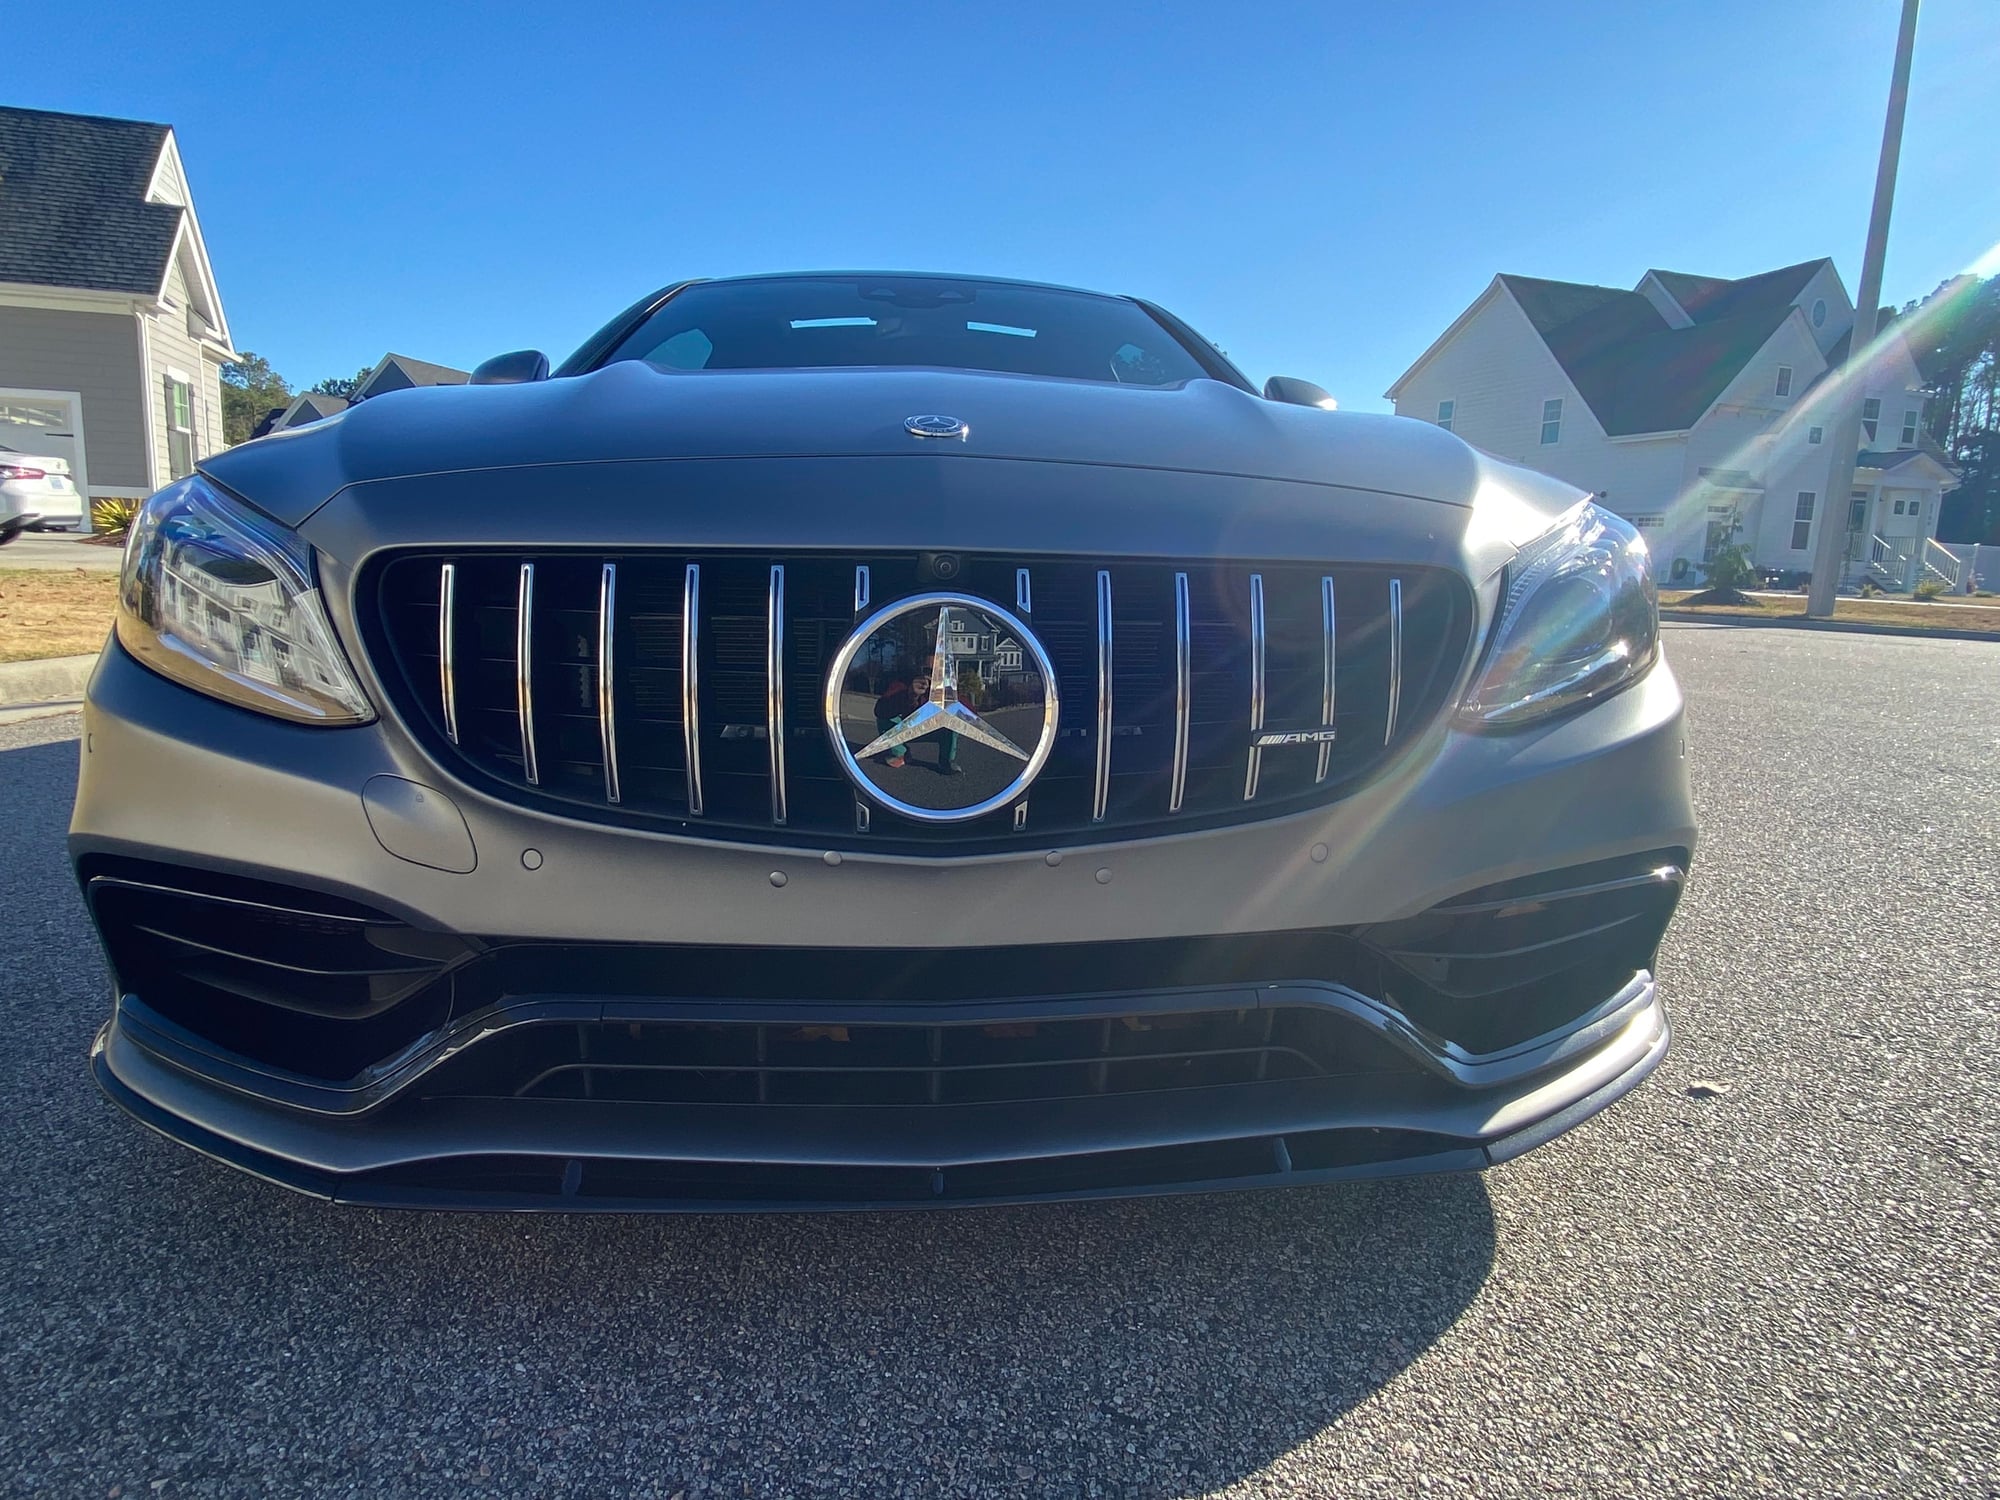 2019 Mercedes-Benz C63 AMG S - 2019 C63s Coupe designo Graphite Grey Magno - Used - VIN WDDWJ8HB8KF905328 - 27,500 Miles - 8 cyl - 2WD - Automatic - Coupe - Other - Virginia Beach, VA 23456, United States